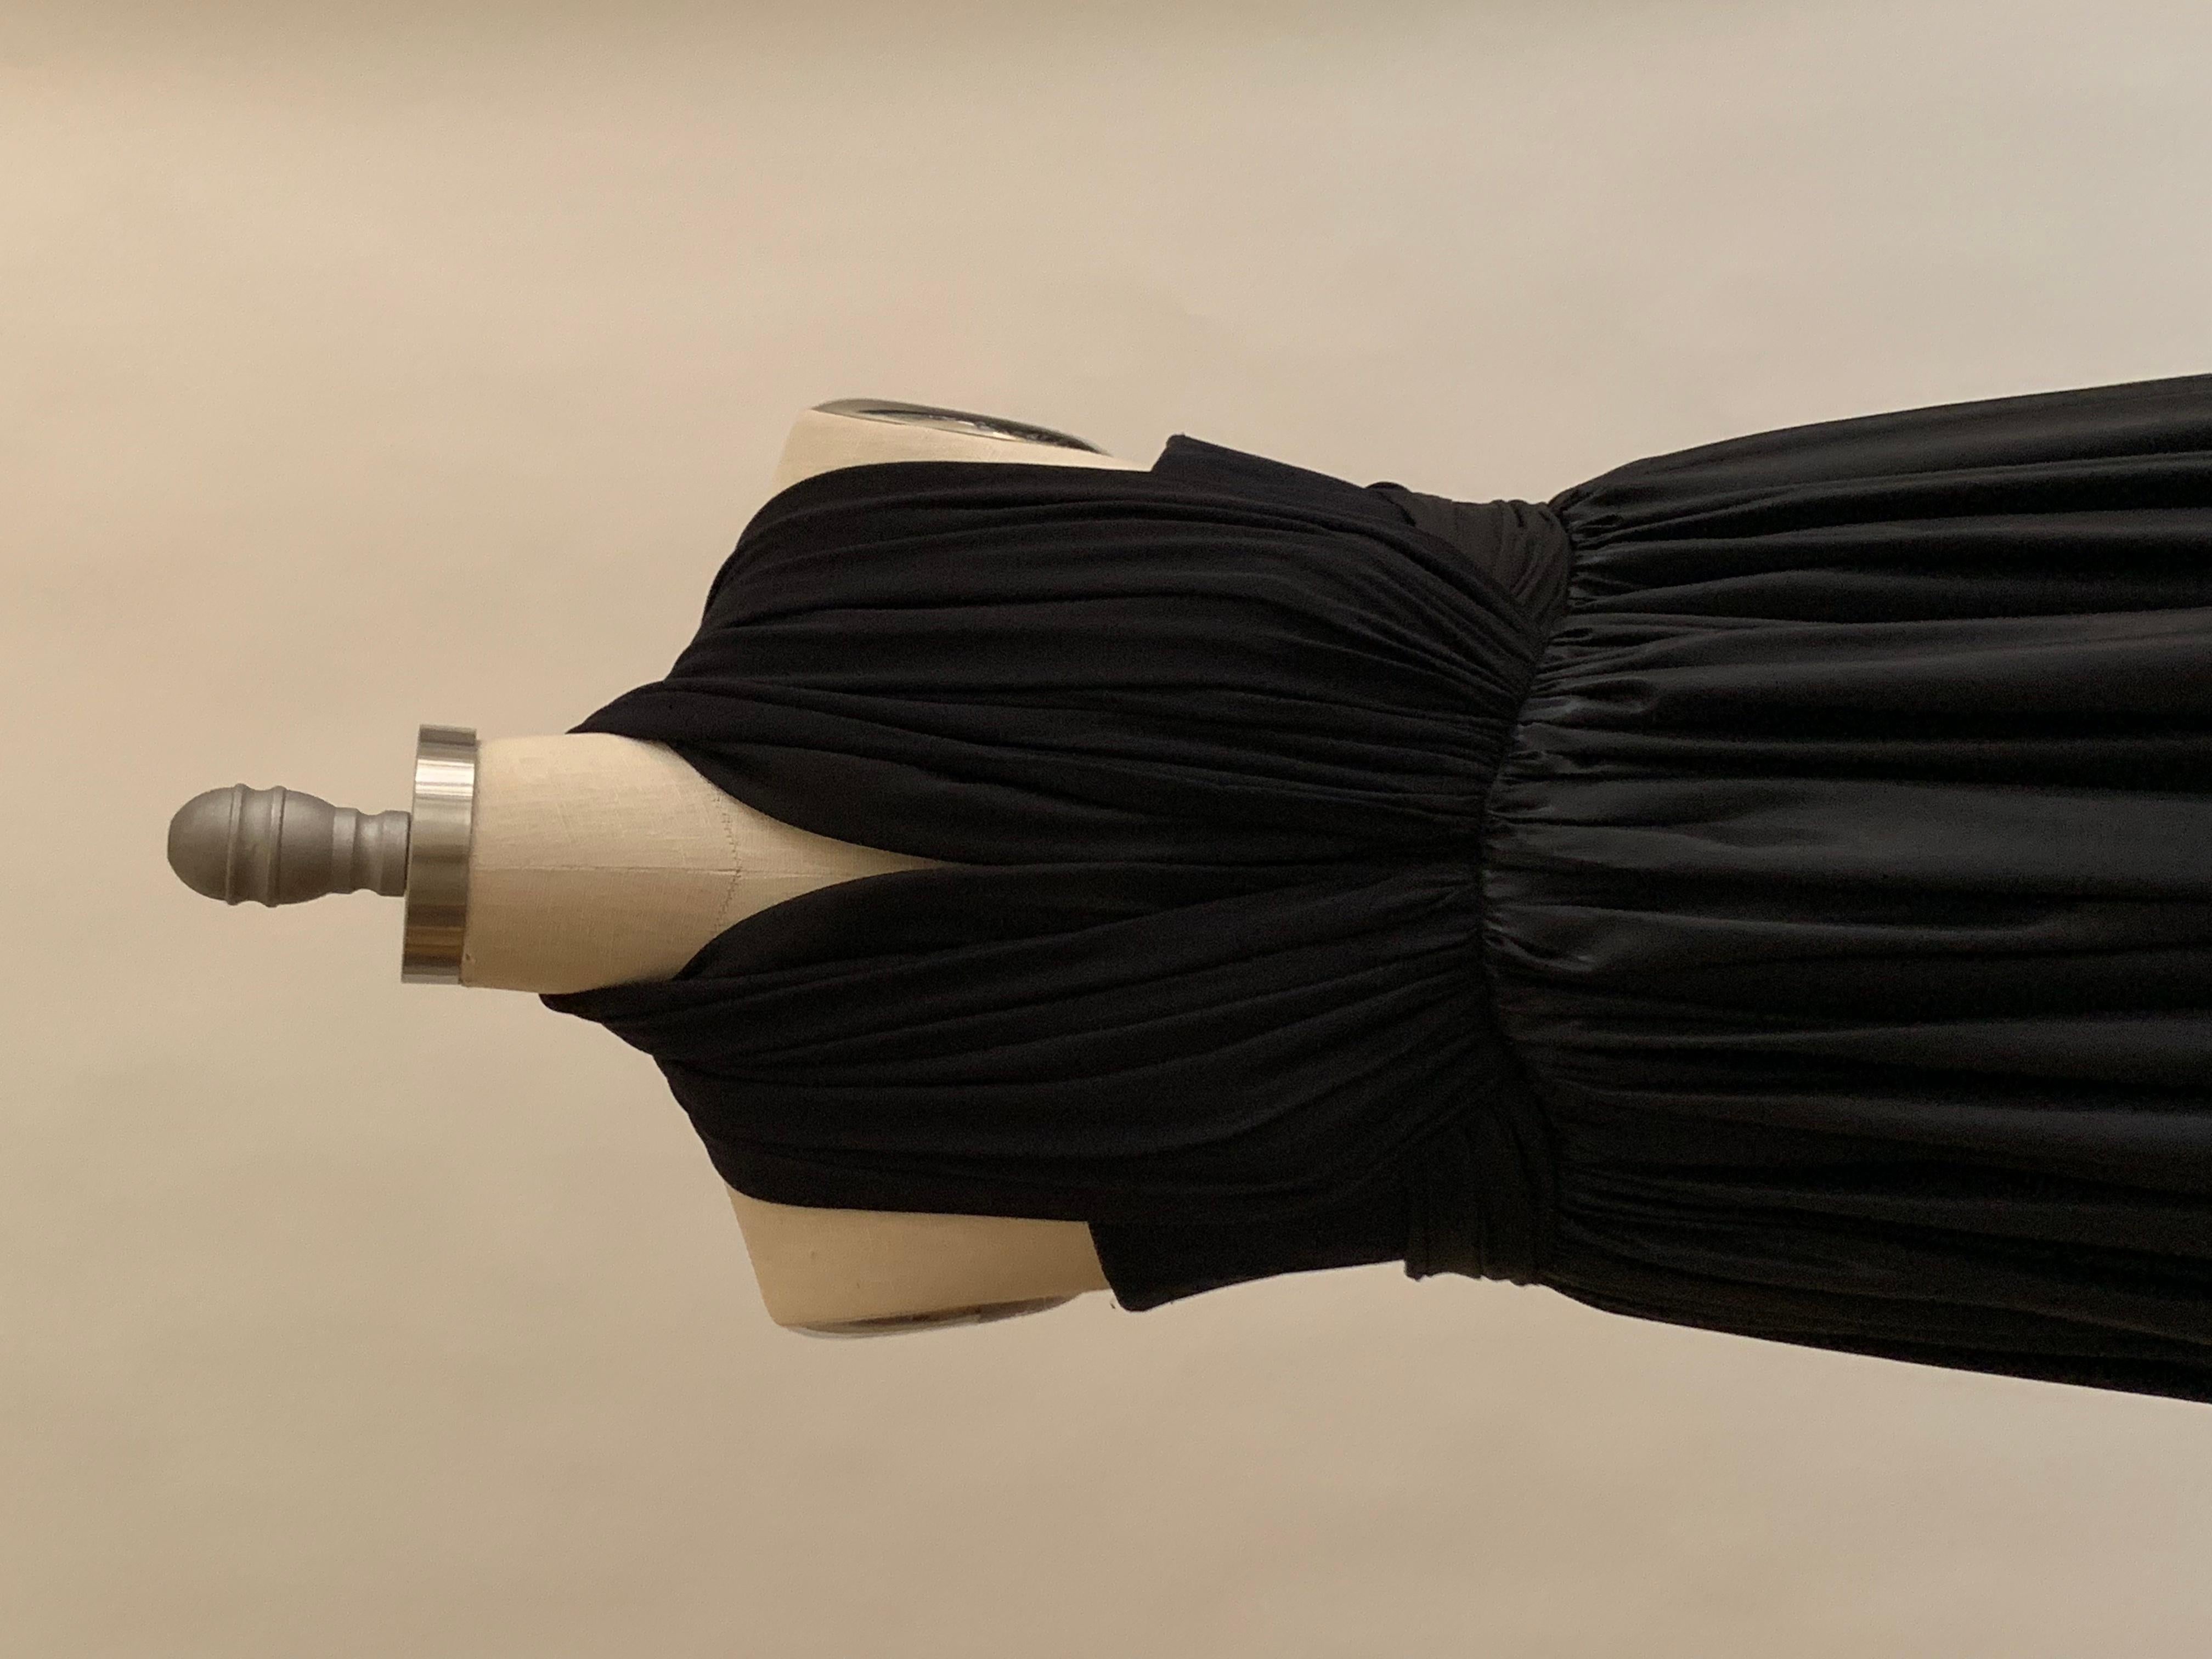 Balenciaga 2004 black dress features a black mesh bodice with two sets of halter straps that attach at waist. Another piece of draped fabric fastens at waist as belt. Skirt has a liquid like sheen and ruffle bottom. Fastens at side with hook and eye